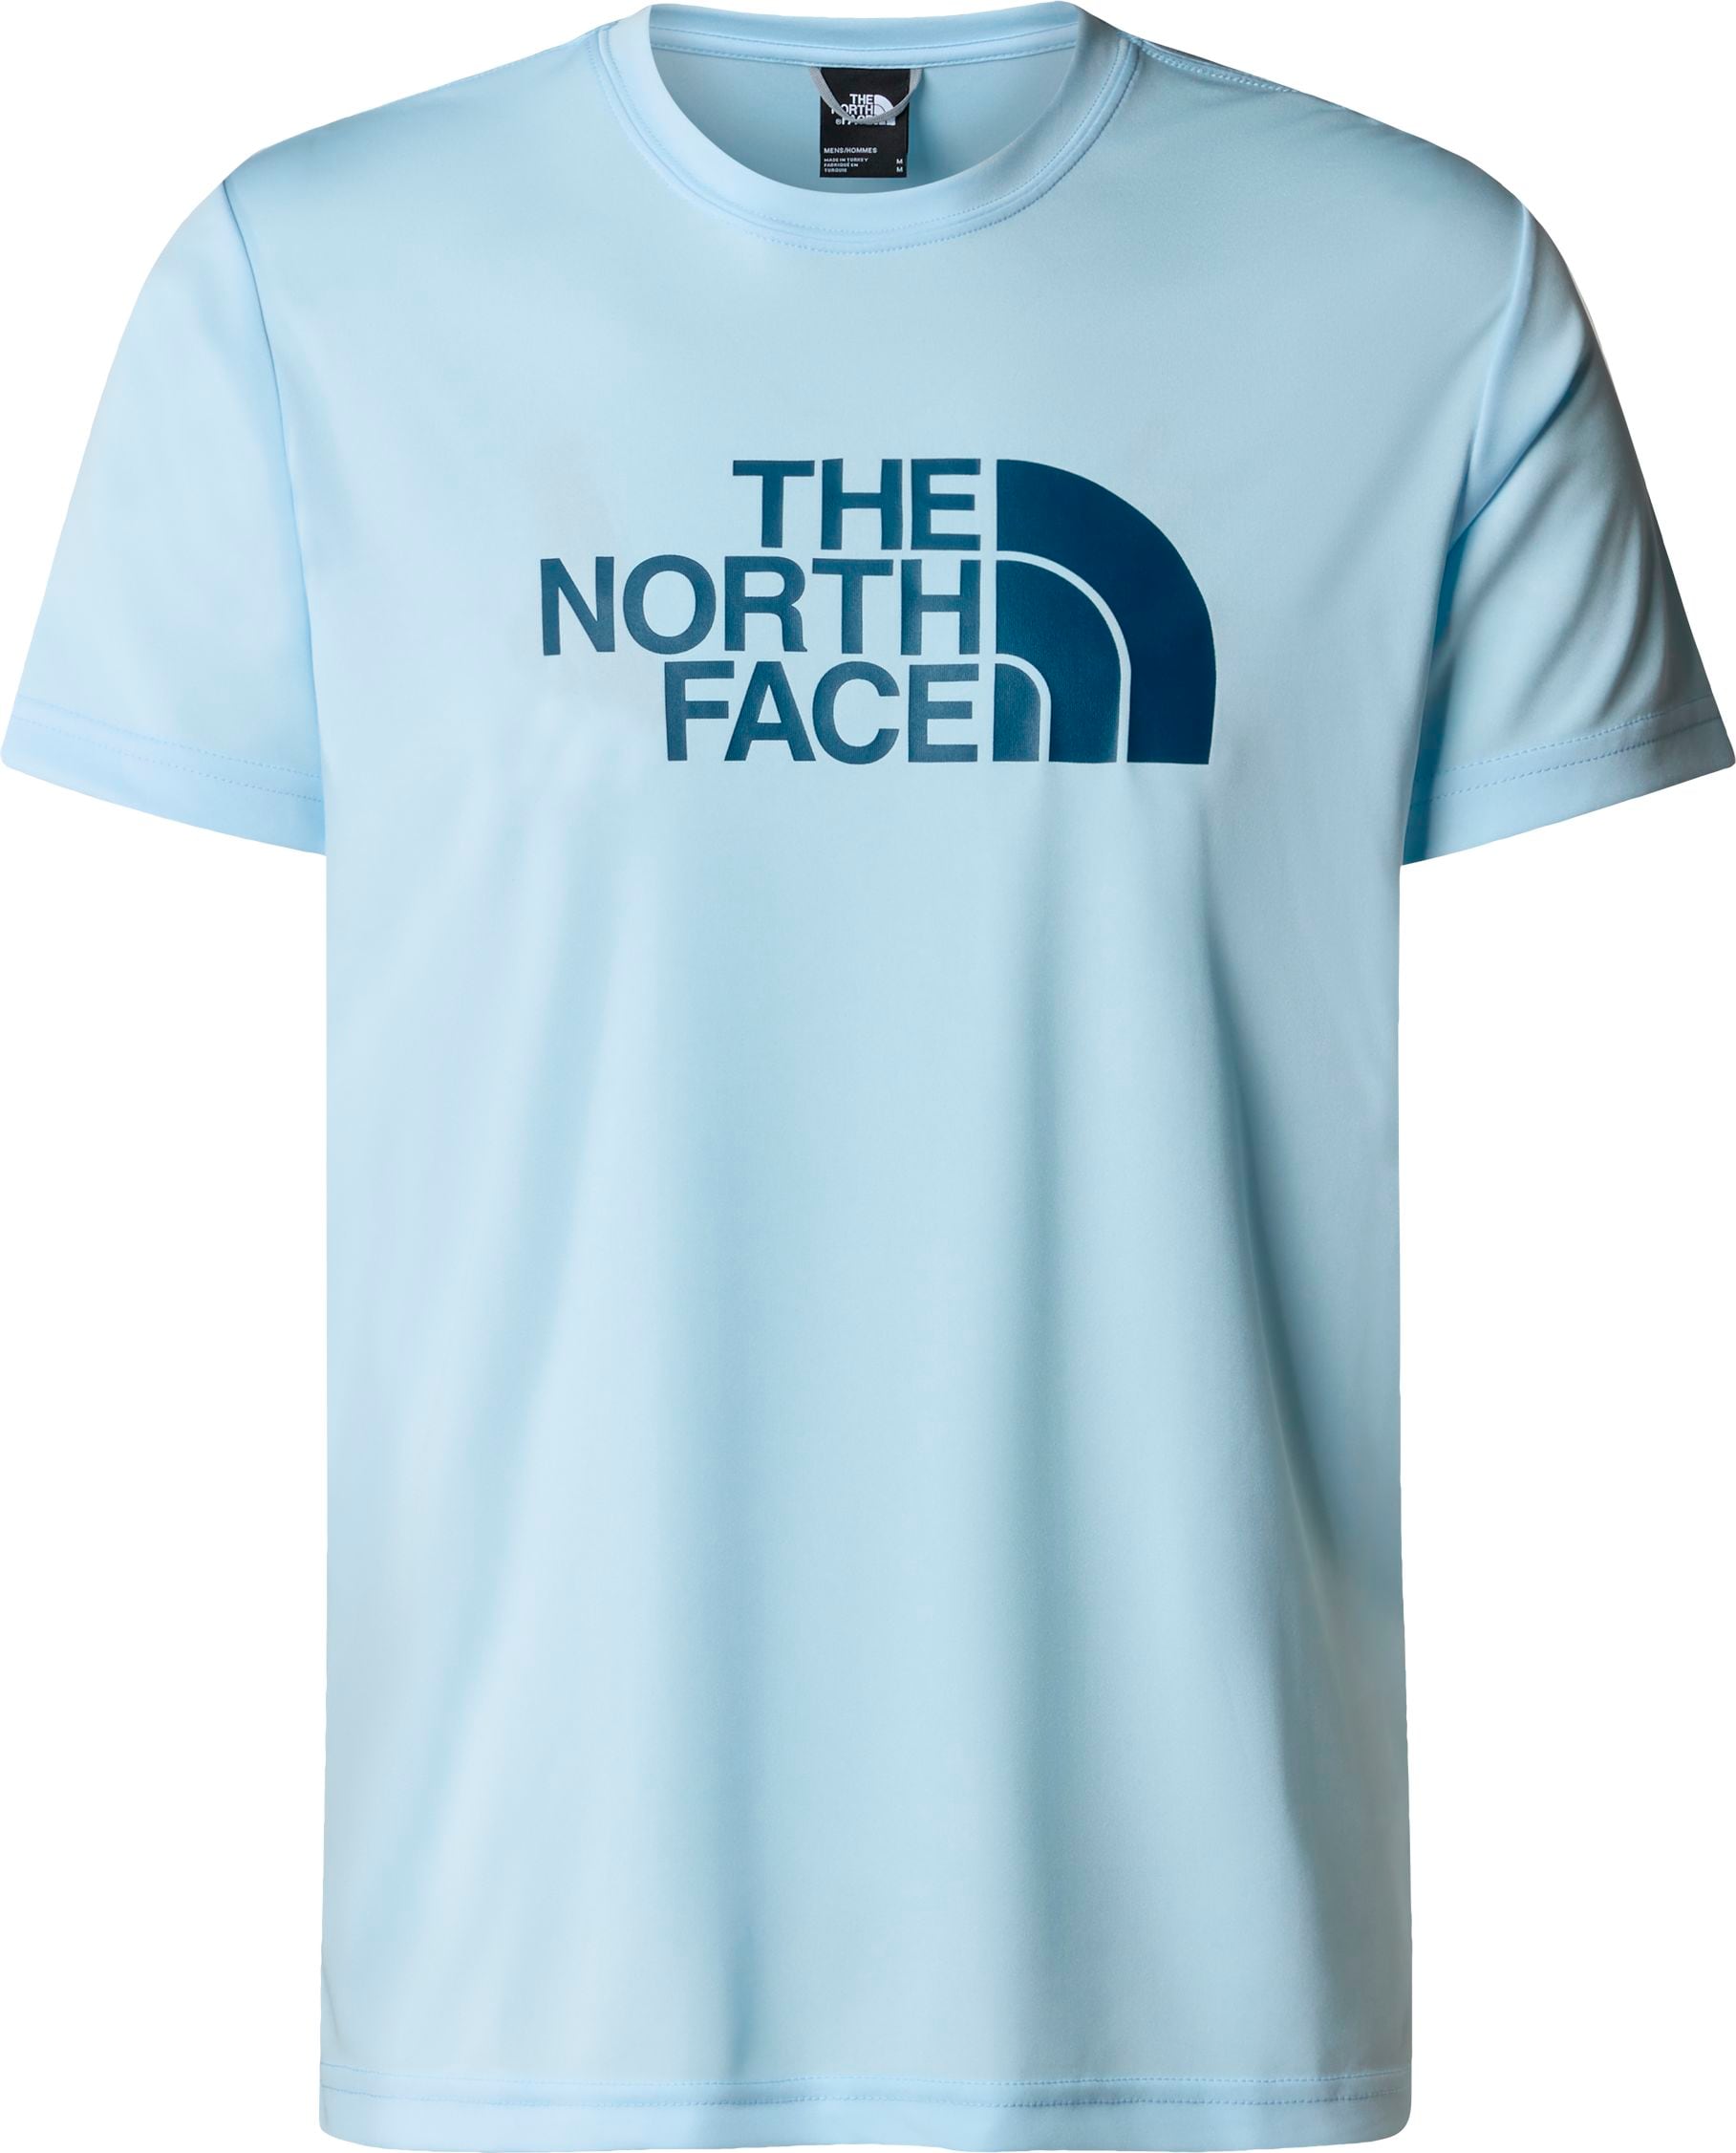 THE NORTH FACE, M REAXION EASY TEE